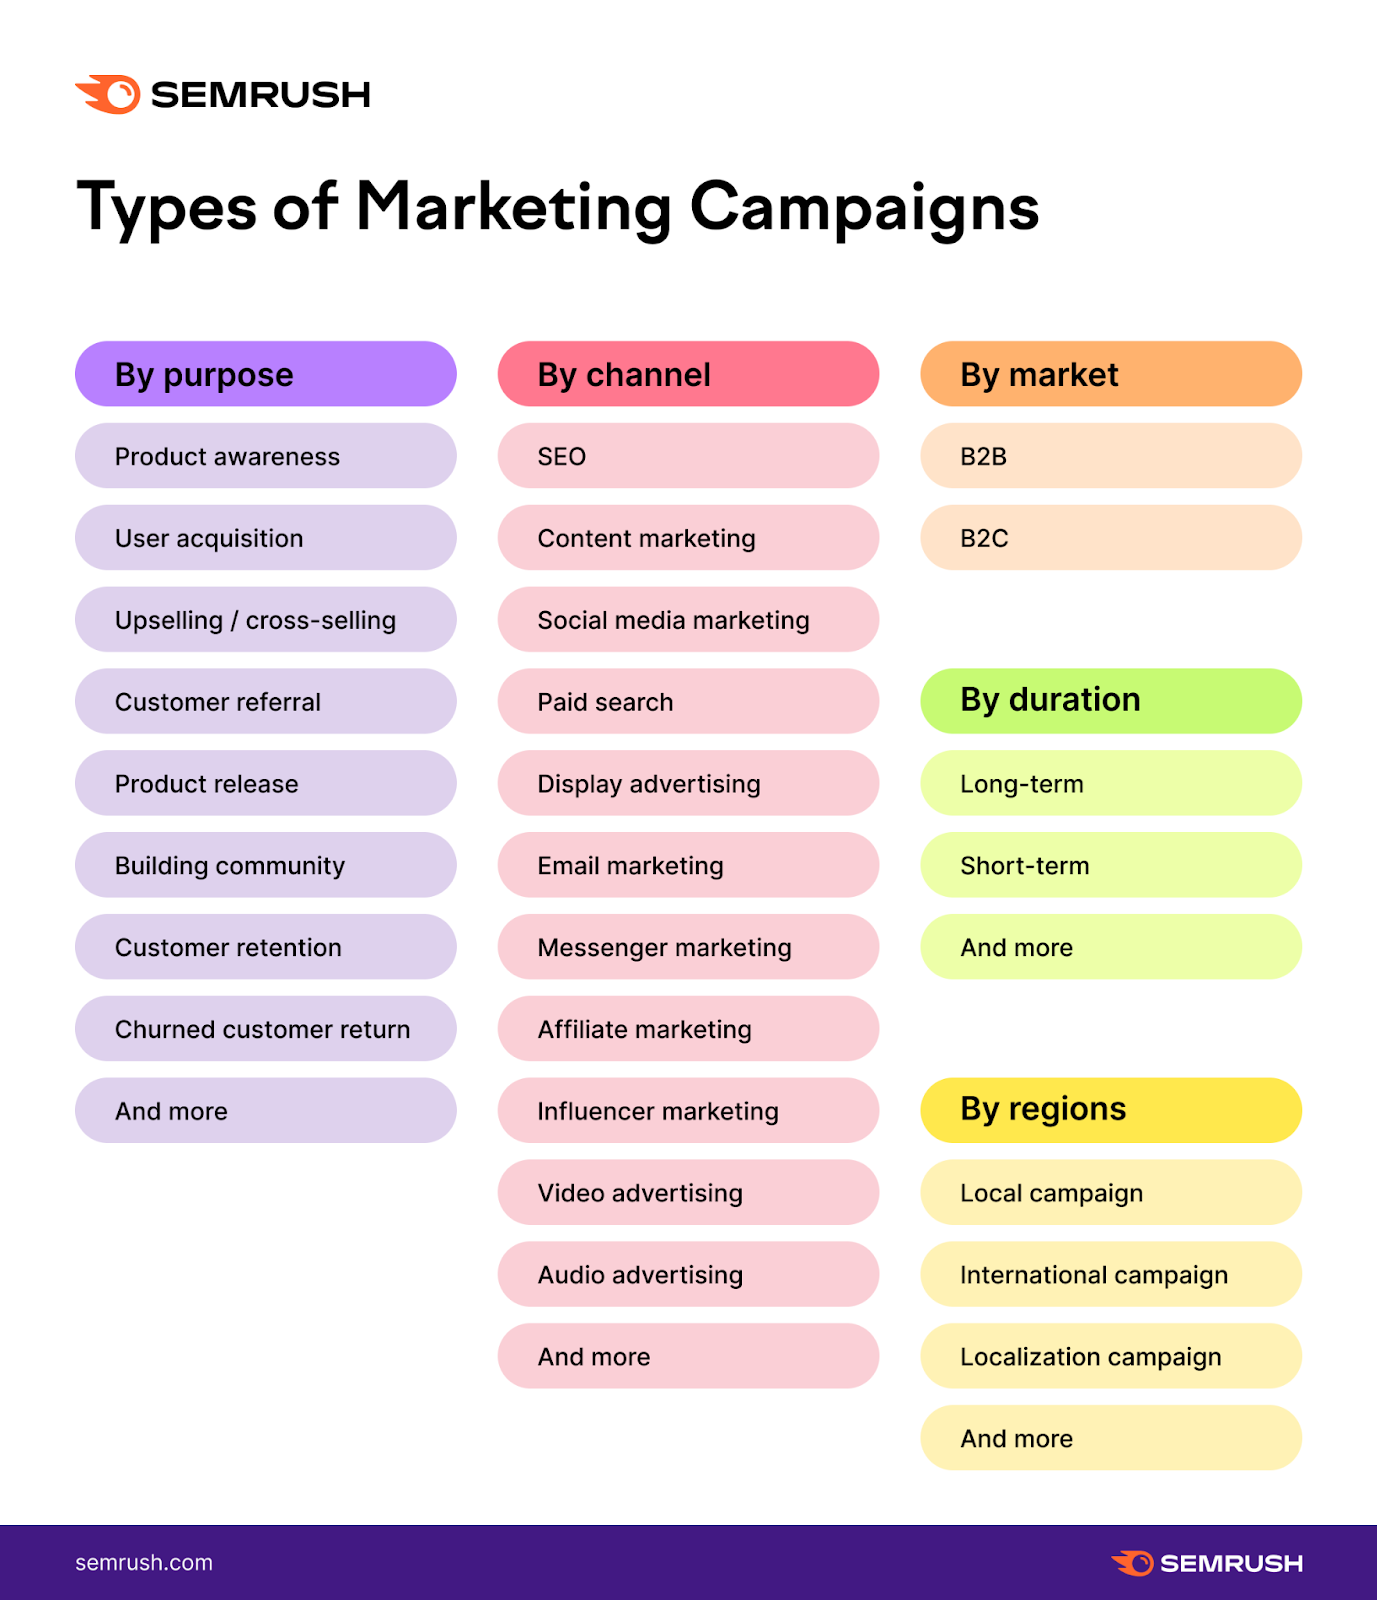 Types of selling  campaigns, by purpose, channel, market, duration, and regions